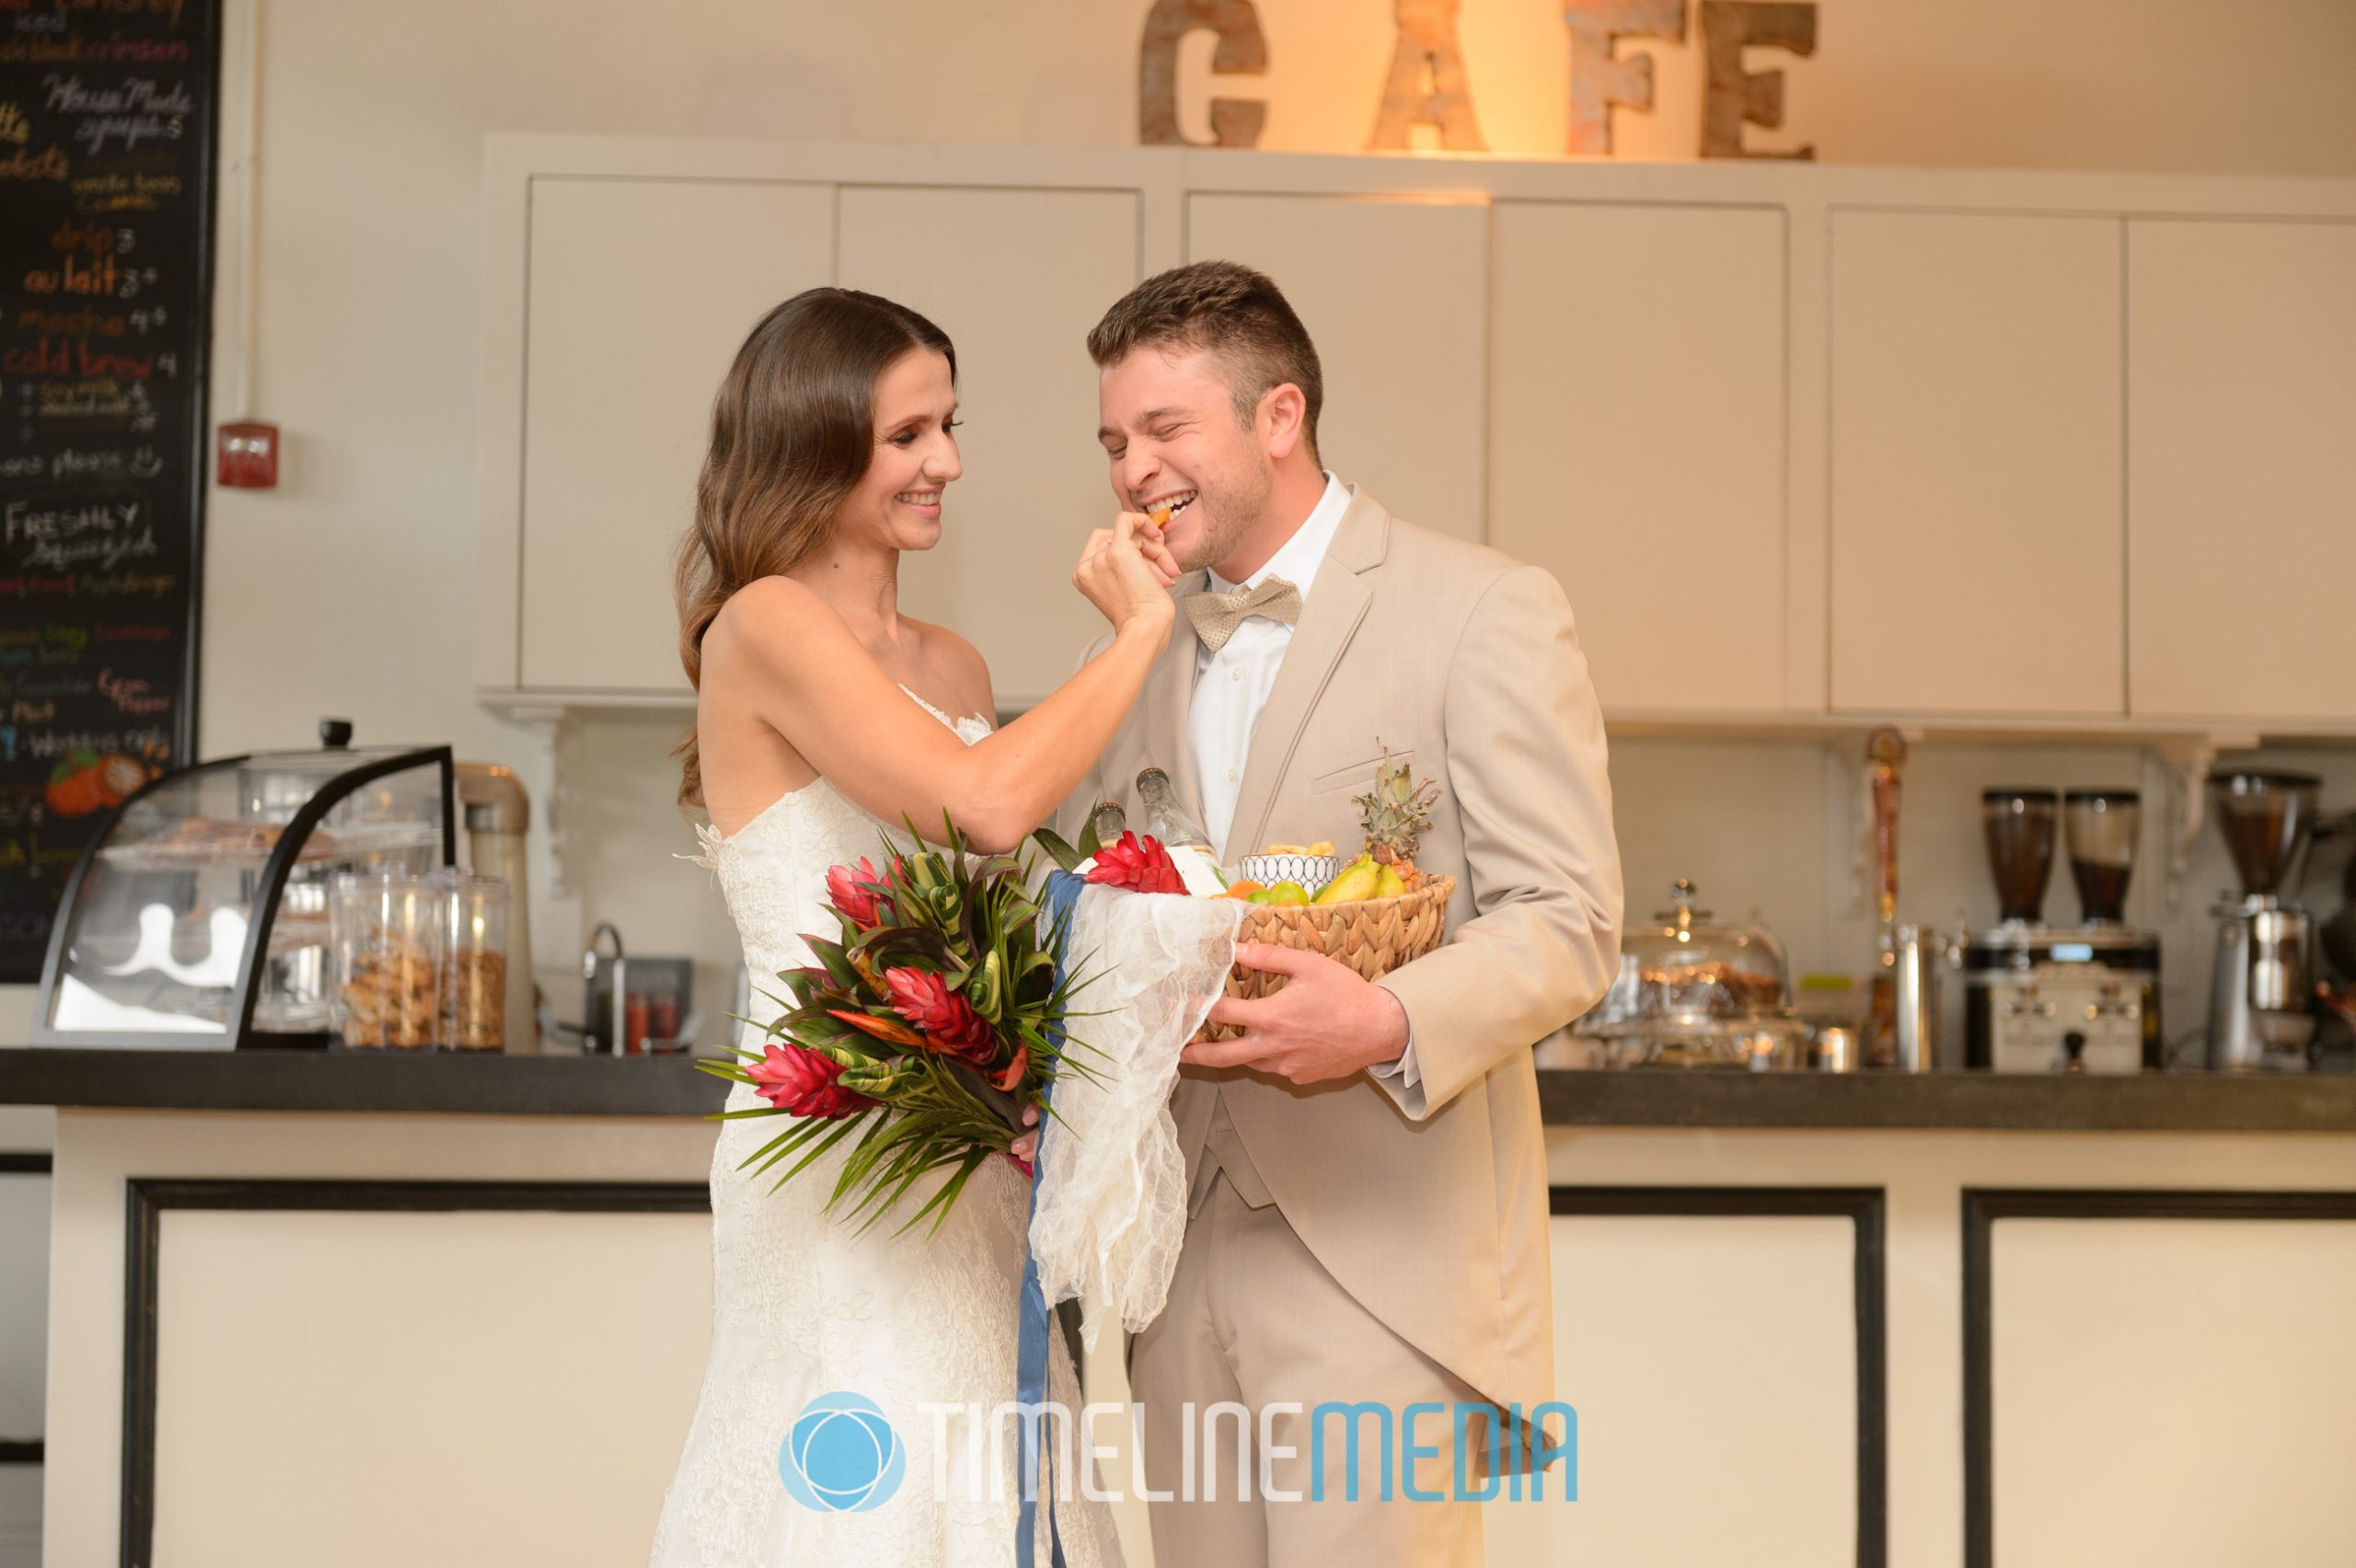 Andrew Roby Events - Bridal for Andrew Roby at Malmaison ©TimeLine Media